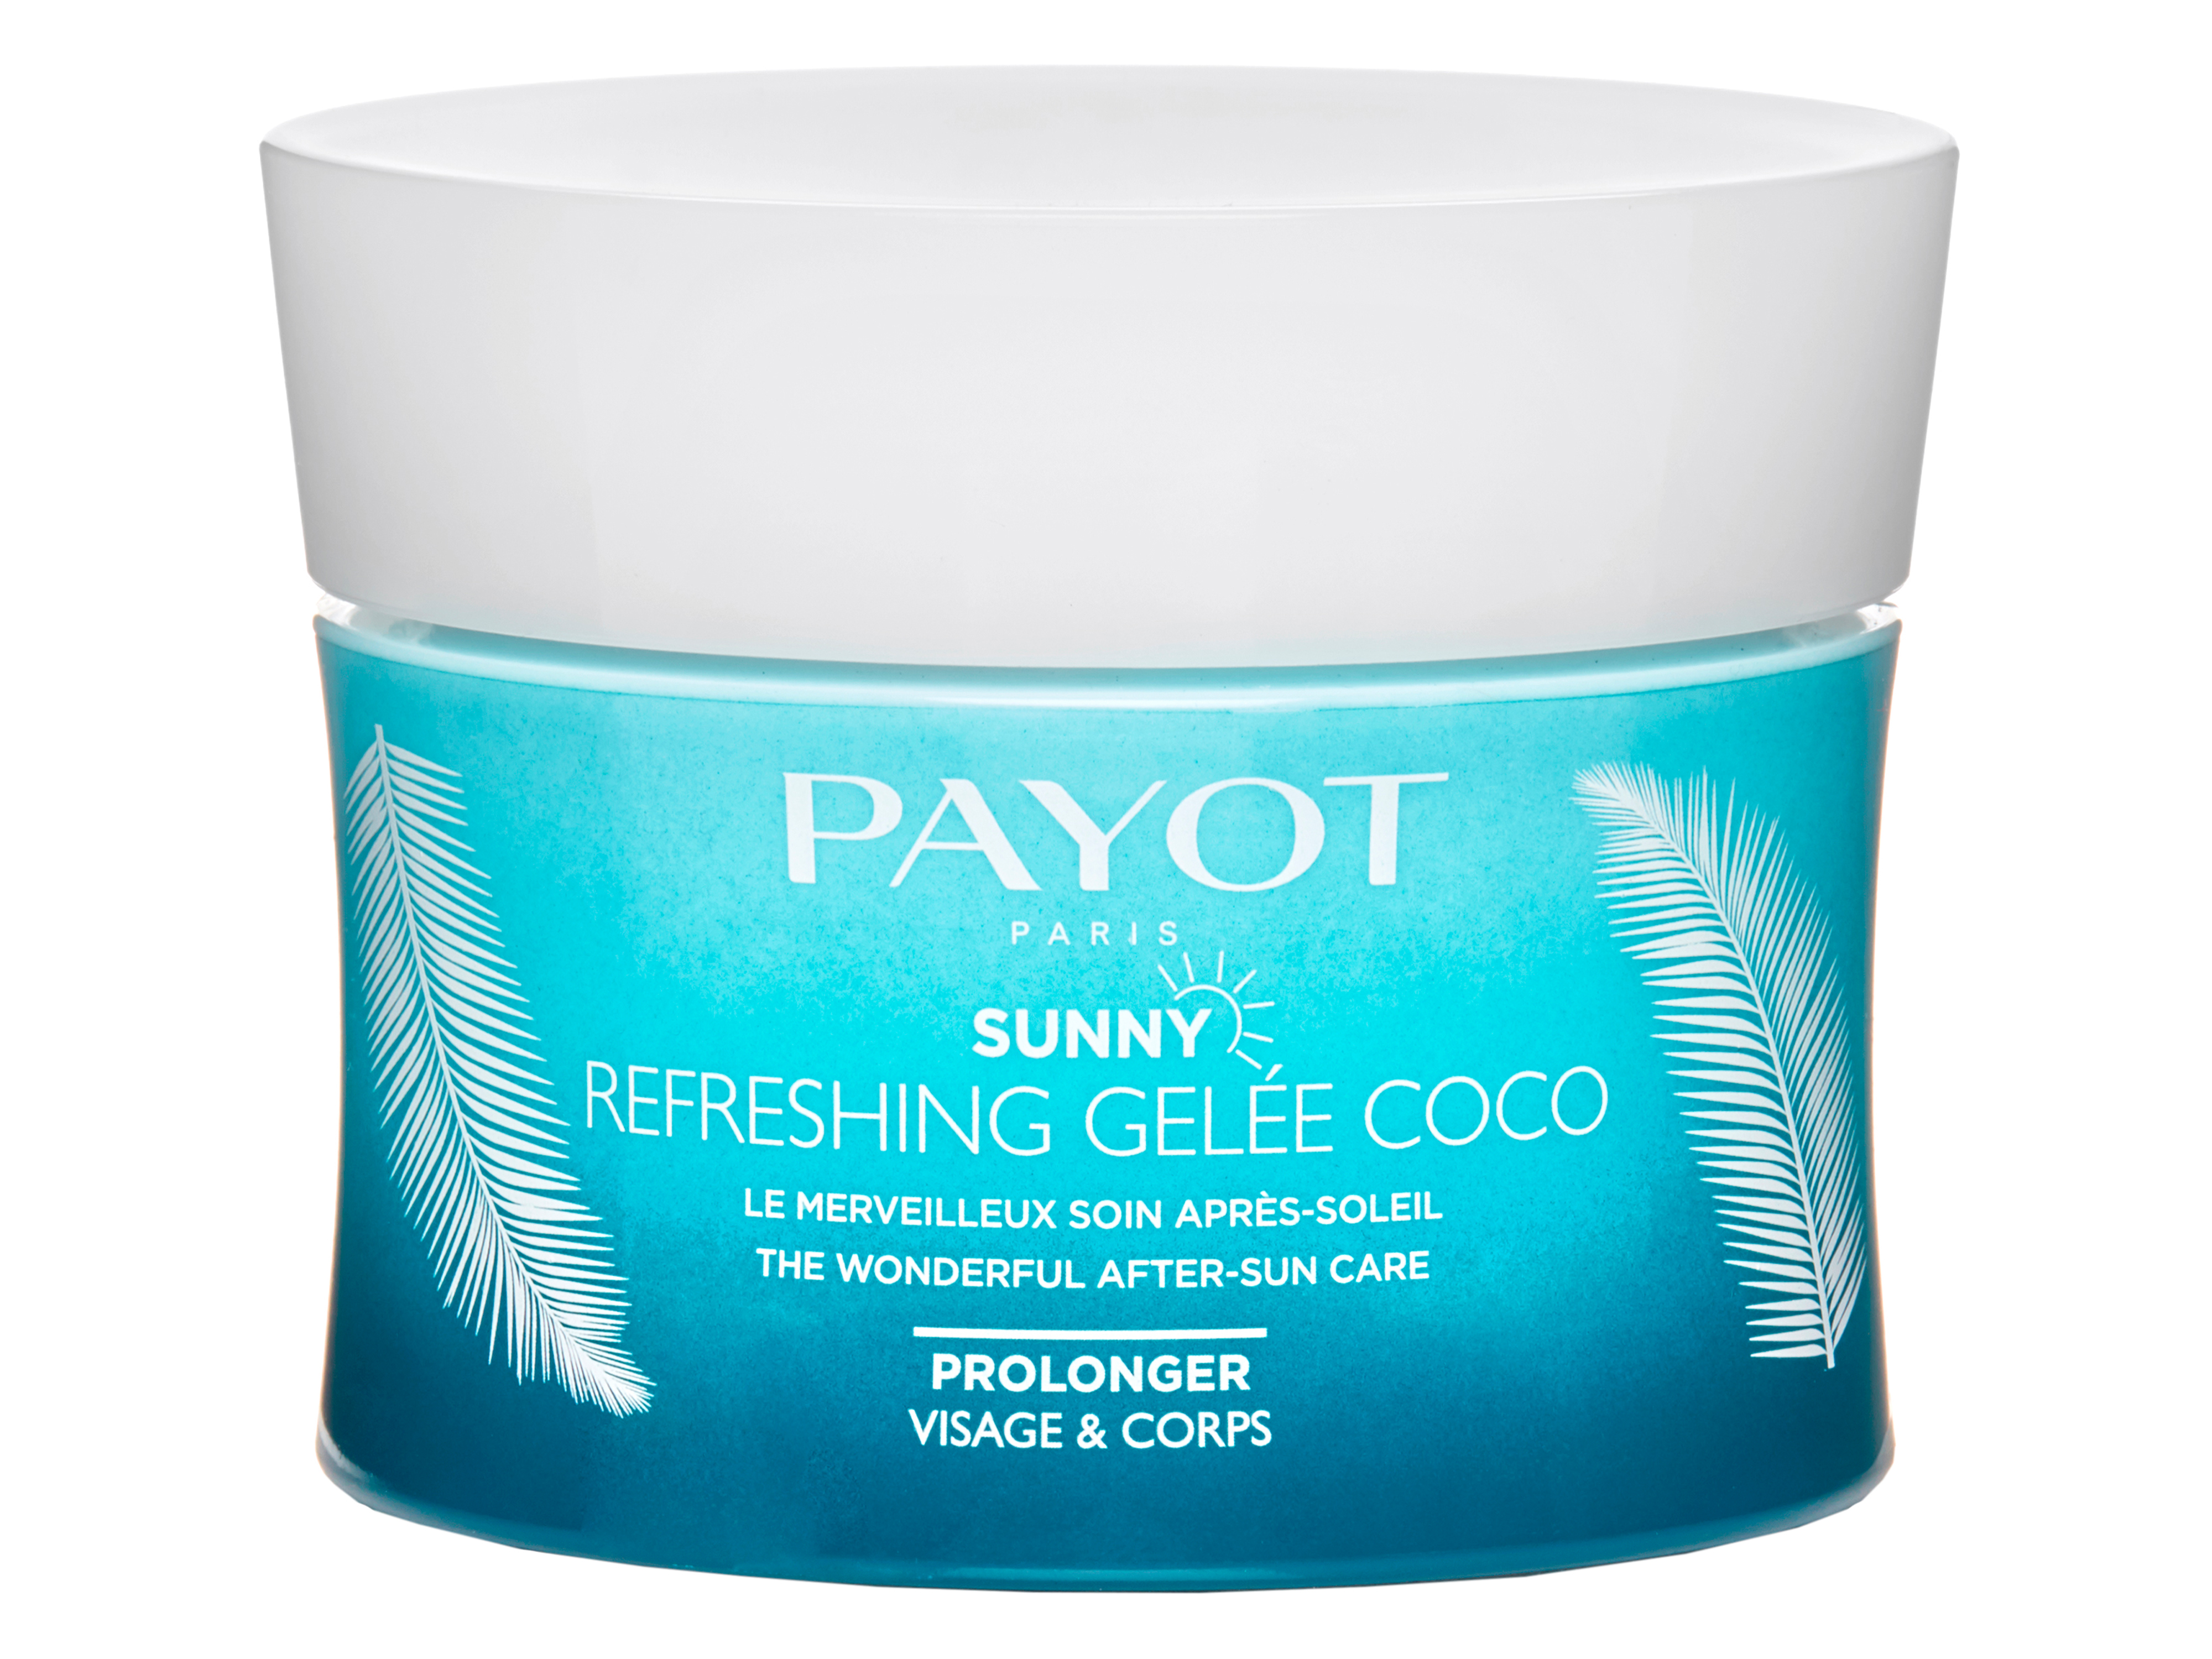 Payot Sunny Refreshing Gelée Coco, 100 ml